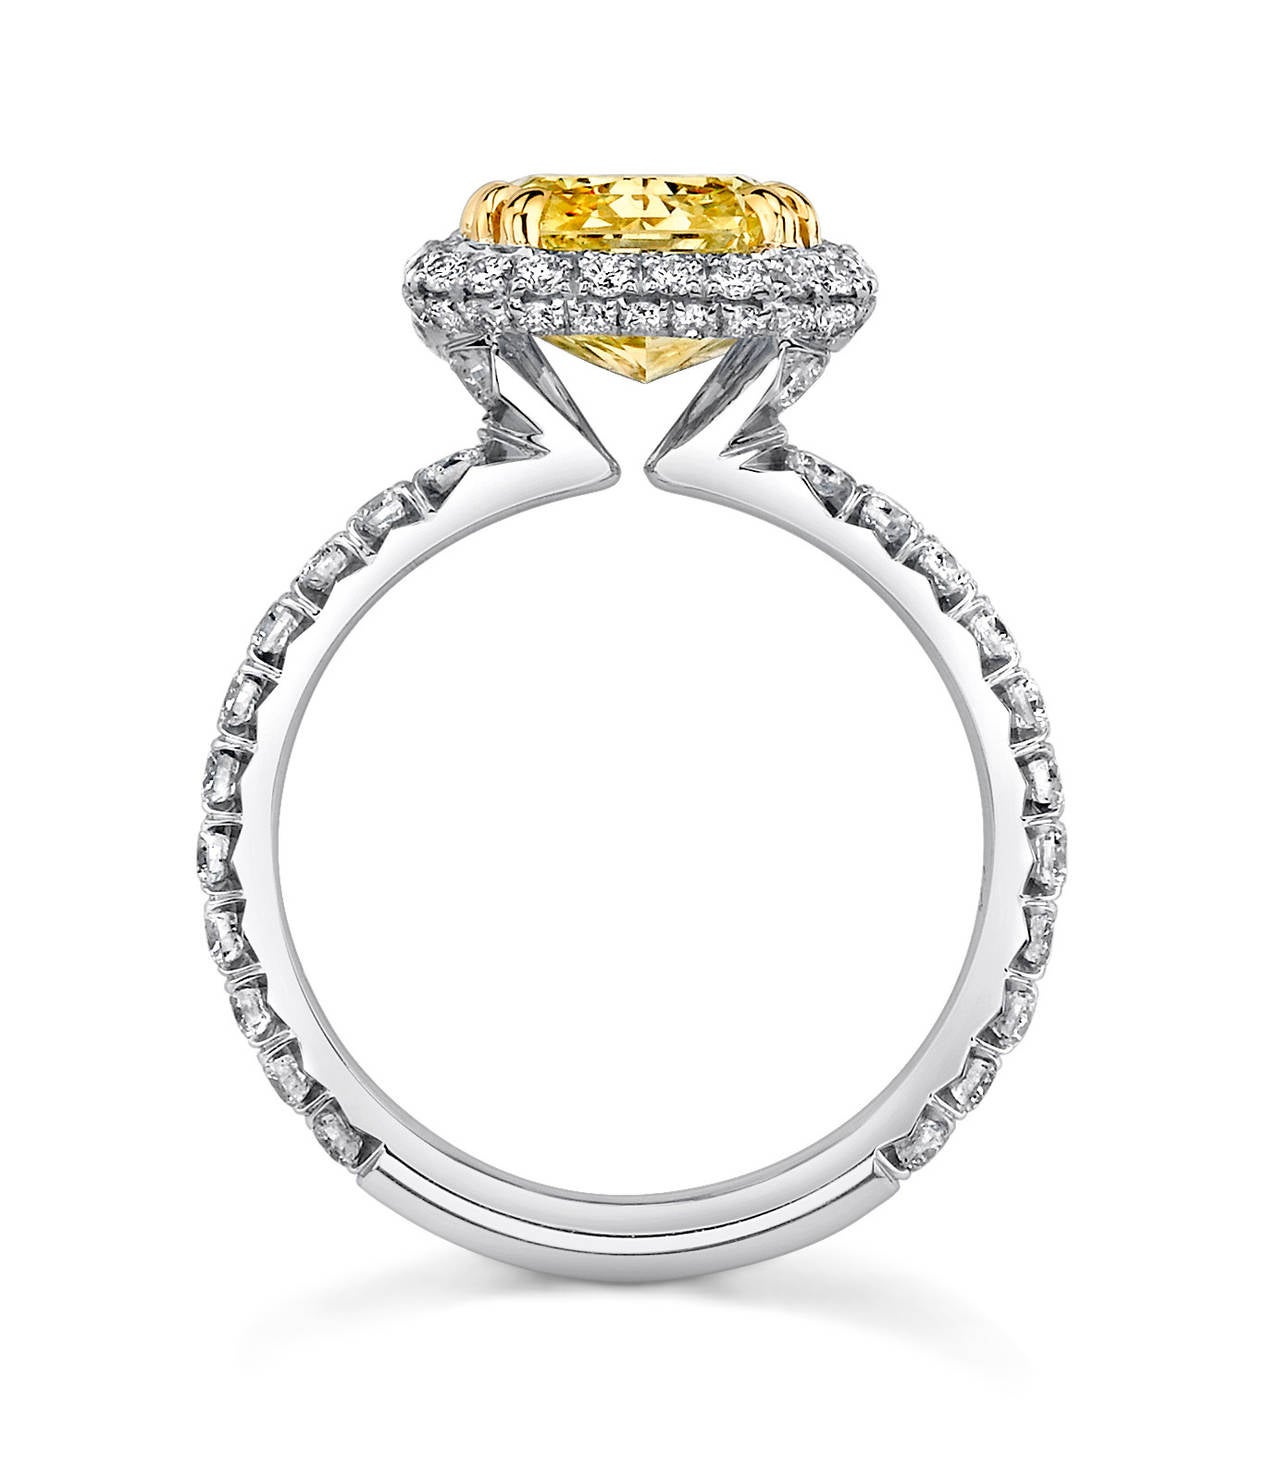 This stunning ring features a 2.61 ct (GIA certified) Rectangular Modified Brilliant Cut Natural Intense Yellow center stone set in 18 Karat Yellow Gold. The Platinum mounting is studded with 0.90 ct Micro Pave Ideal Cut Diamonds, acting as the